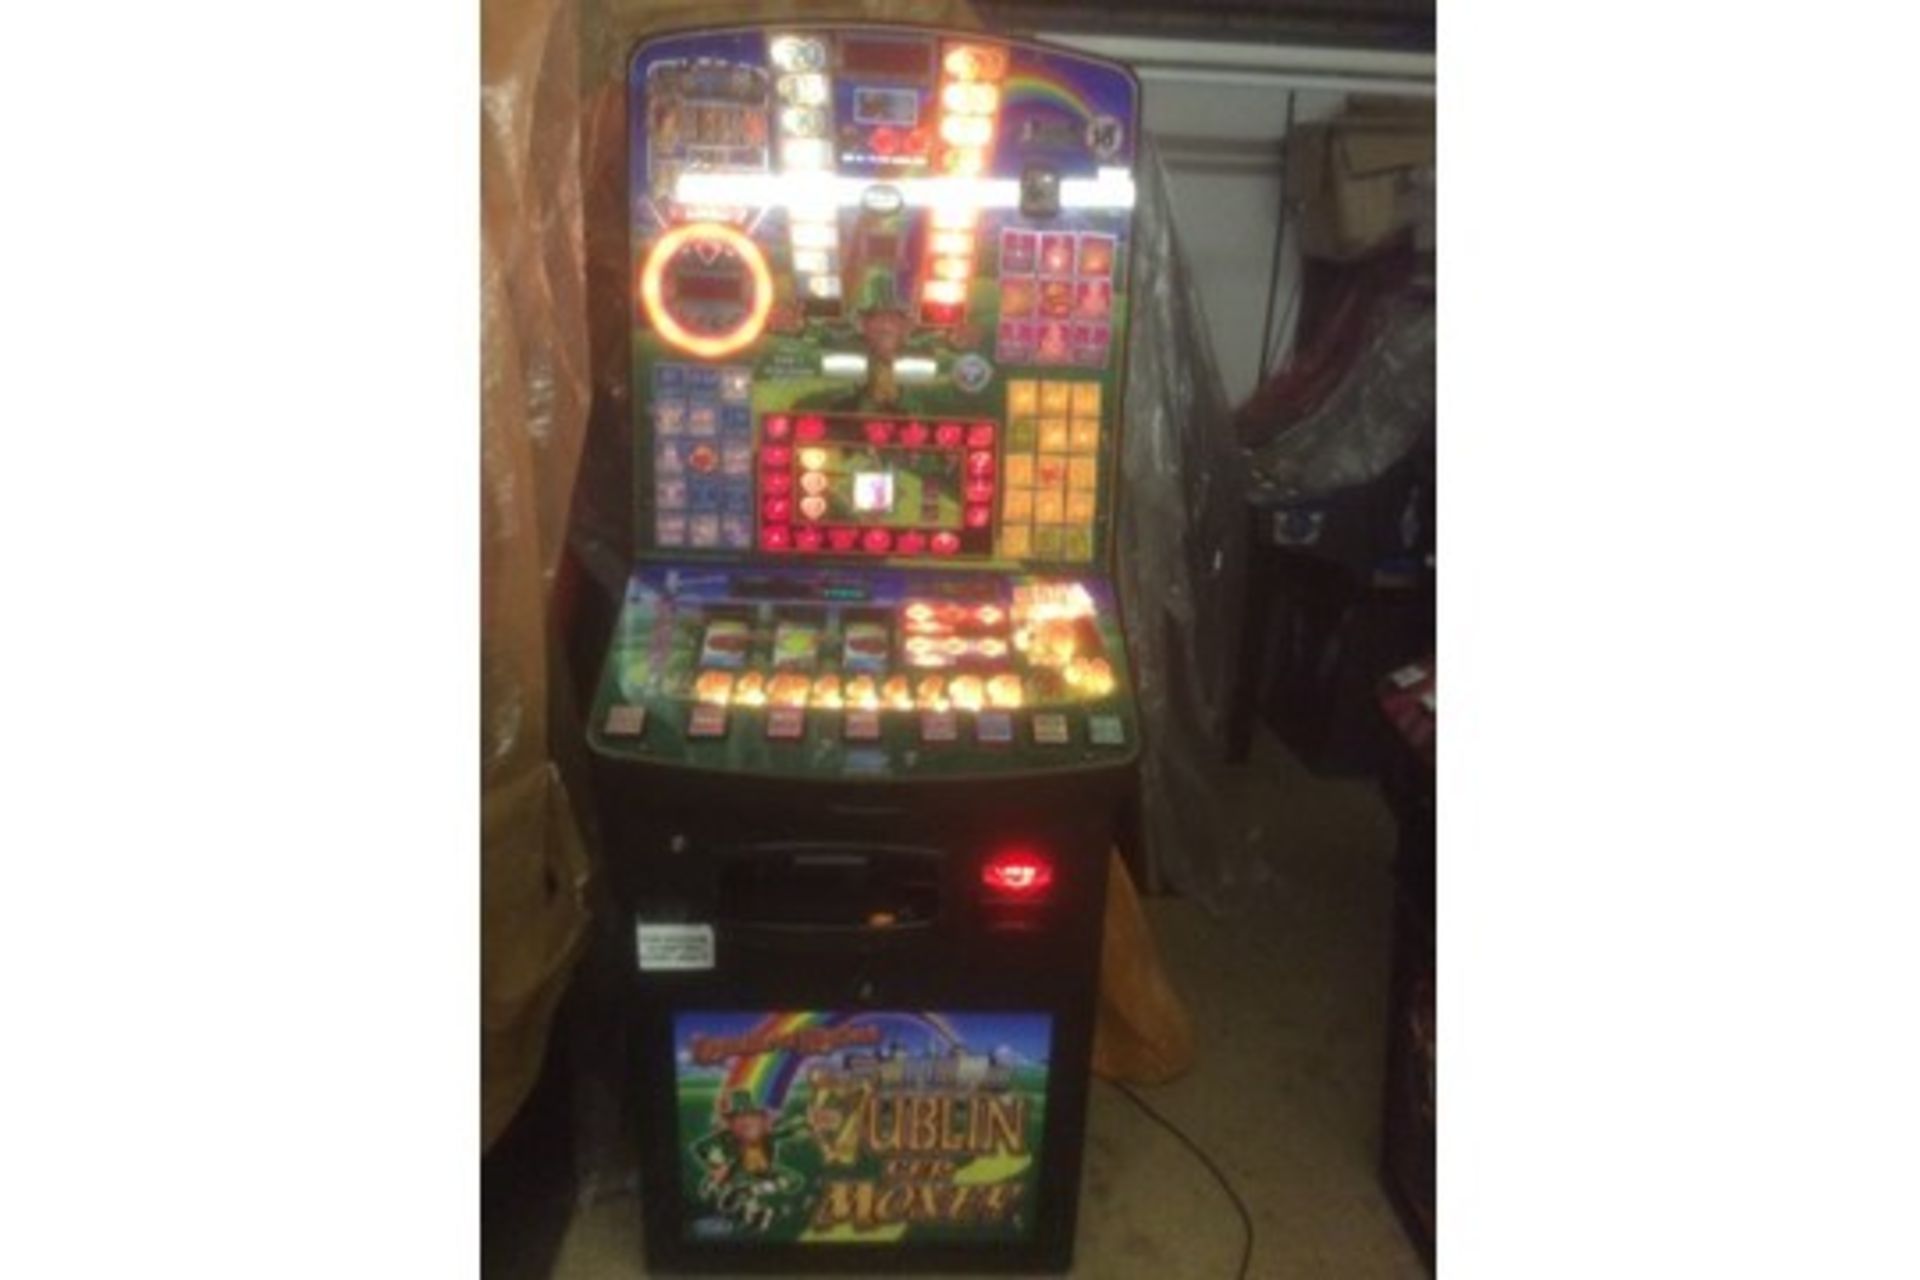 Double your Money Fruit Machine – works on New £1 coin